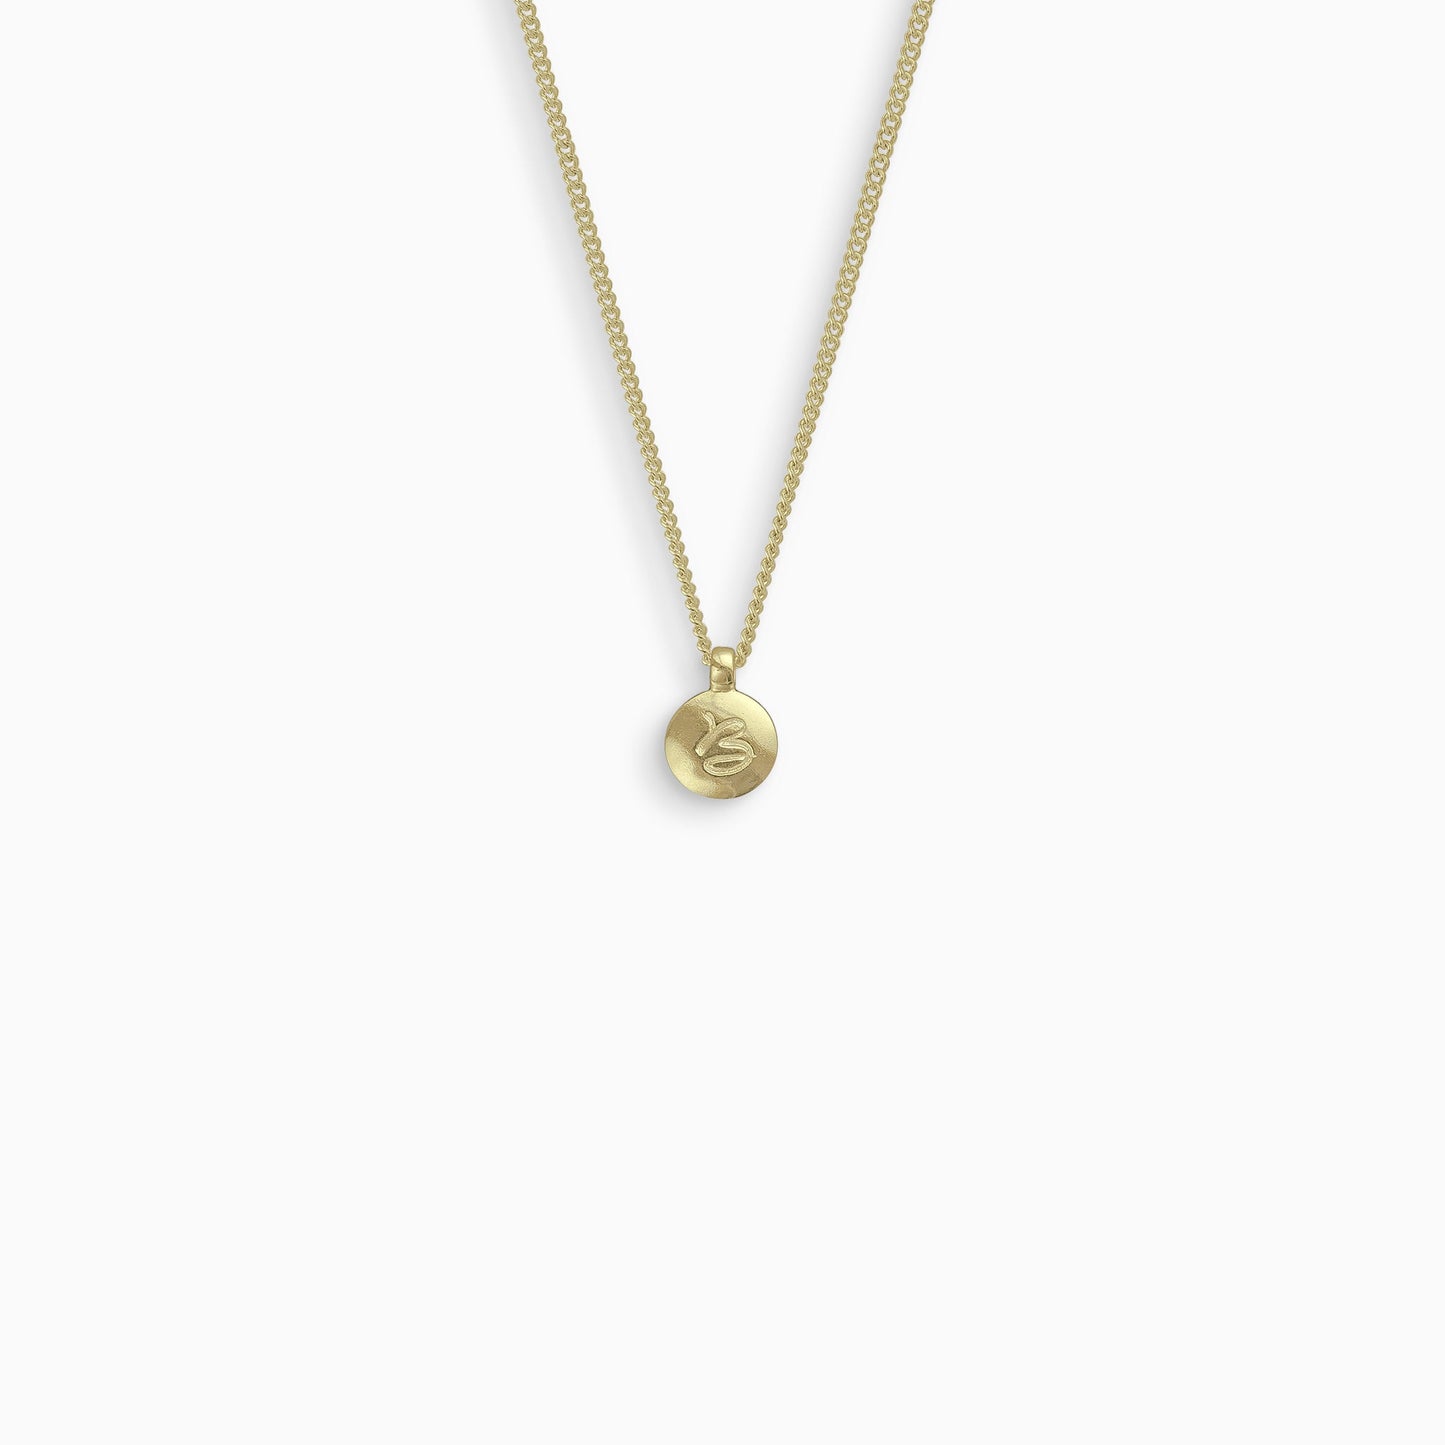 18ct Fairtrade yellow gold 13mm round smooth convex pendant inscribed with a single letter of your choice from A-Z. On a 45cm curb chain.